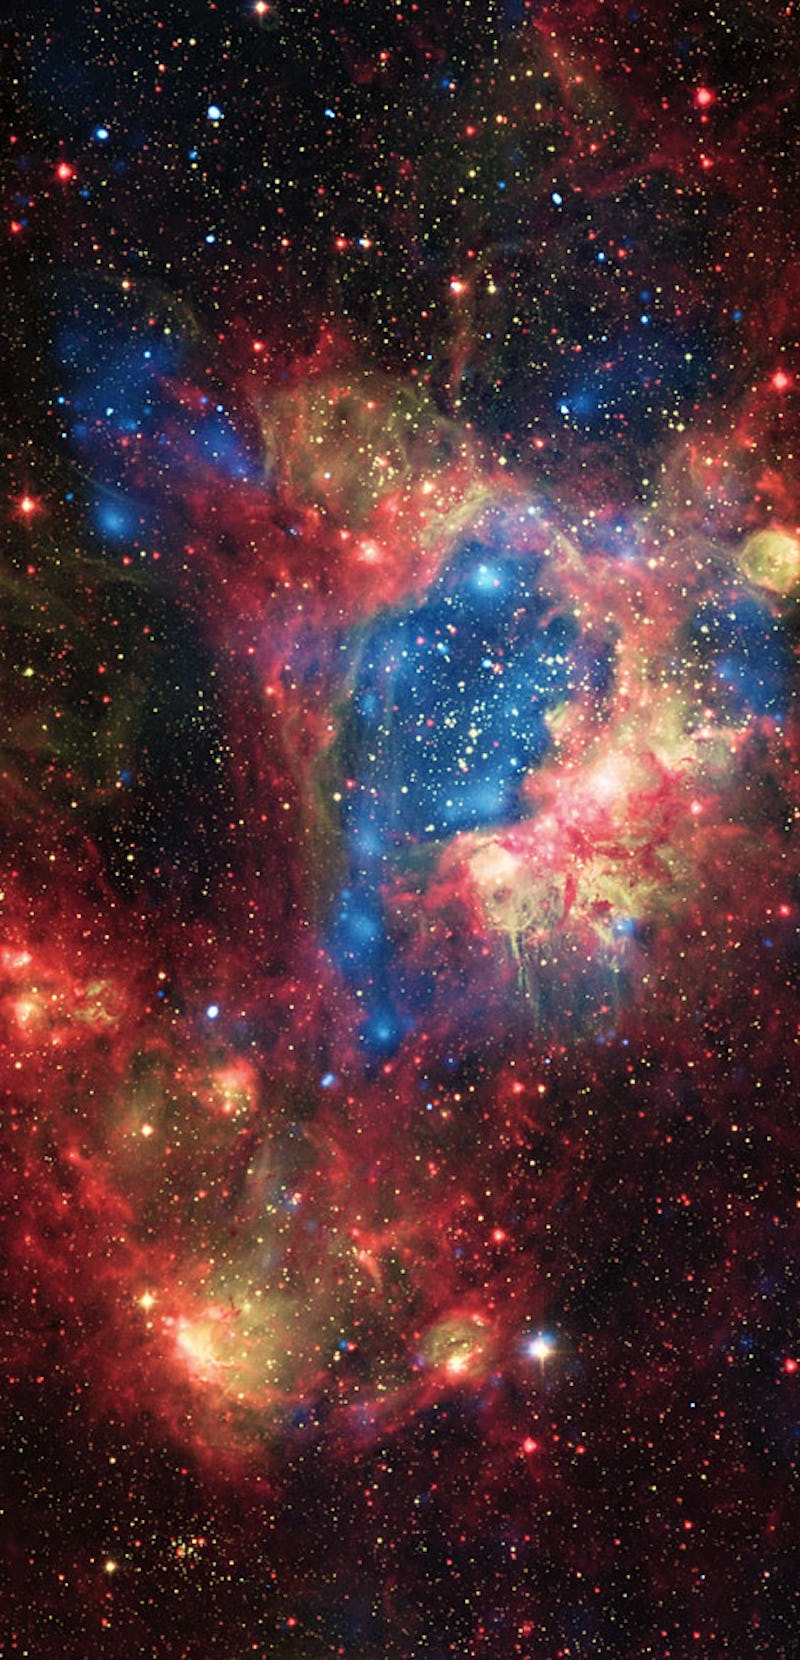 This colourful new view shows the star-forming region LHA 120-N44 [1] in the Large Magellanic Cloud,...